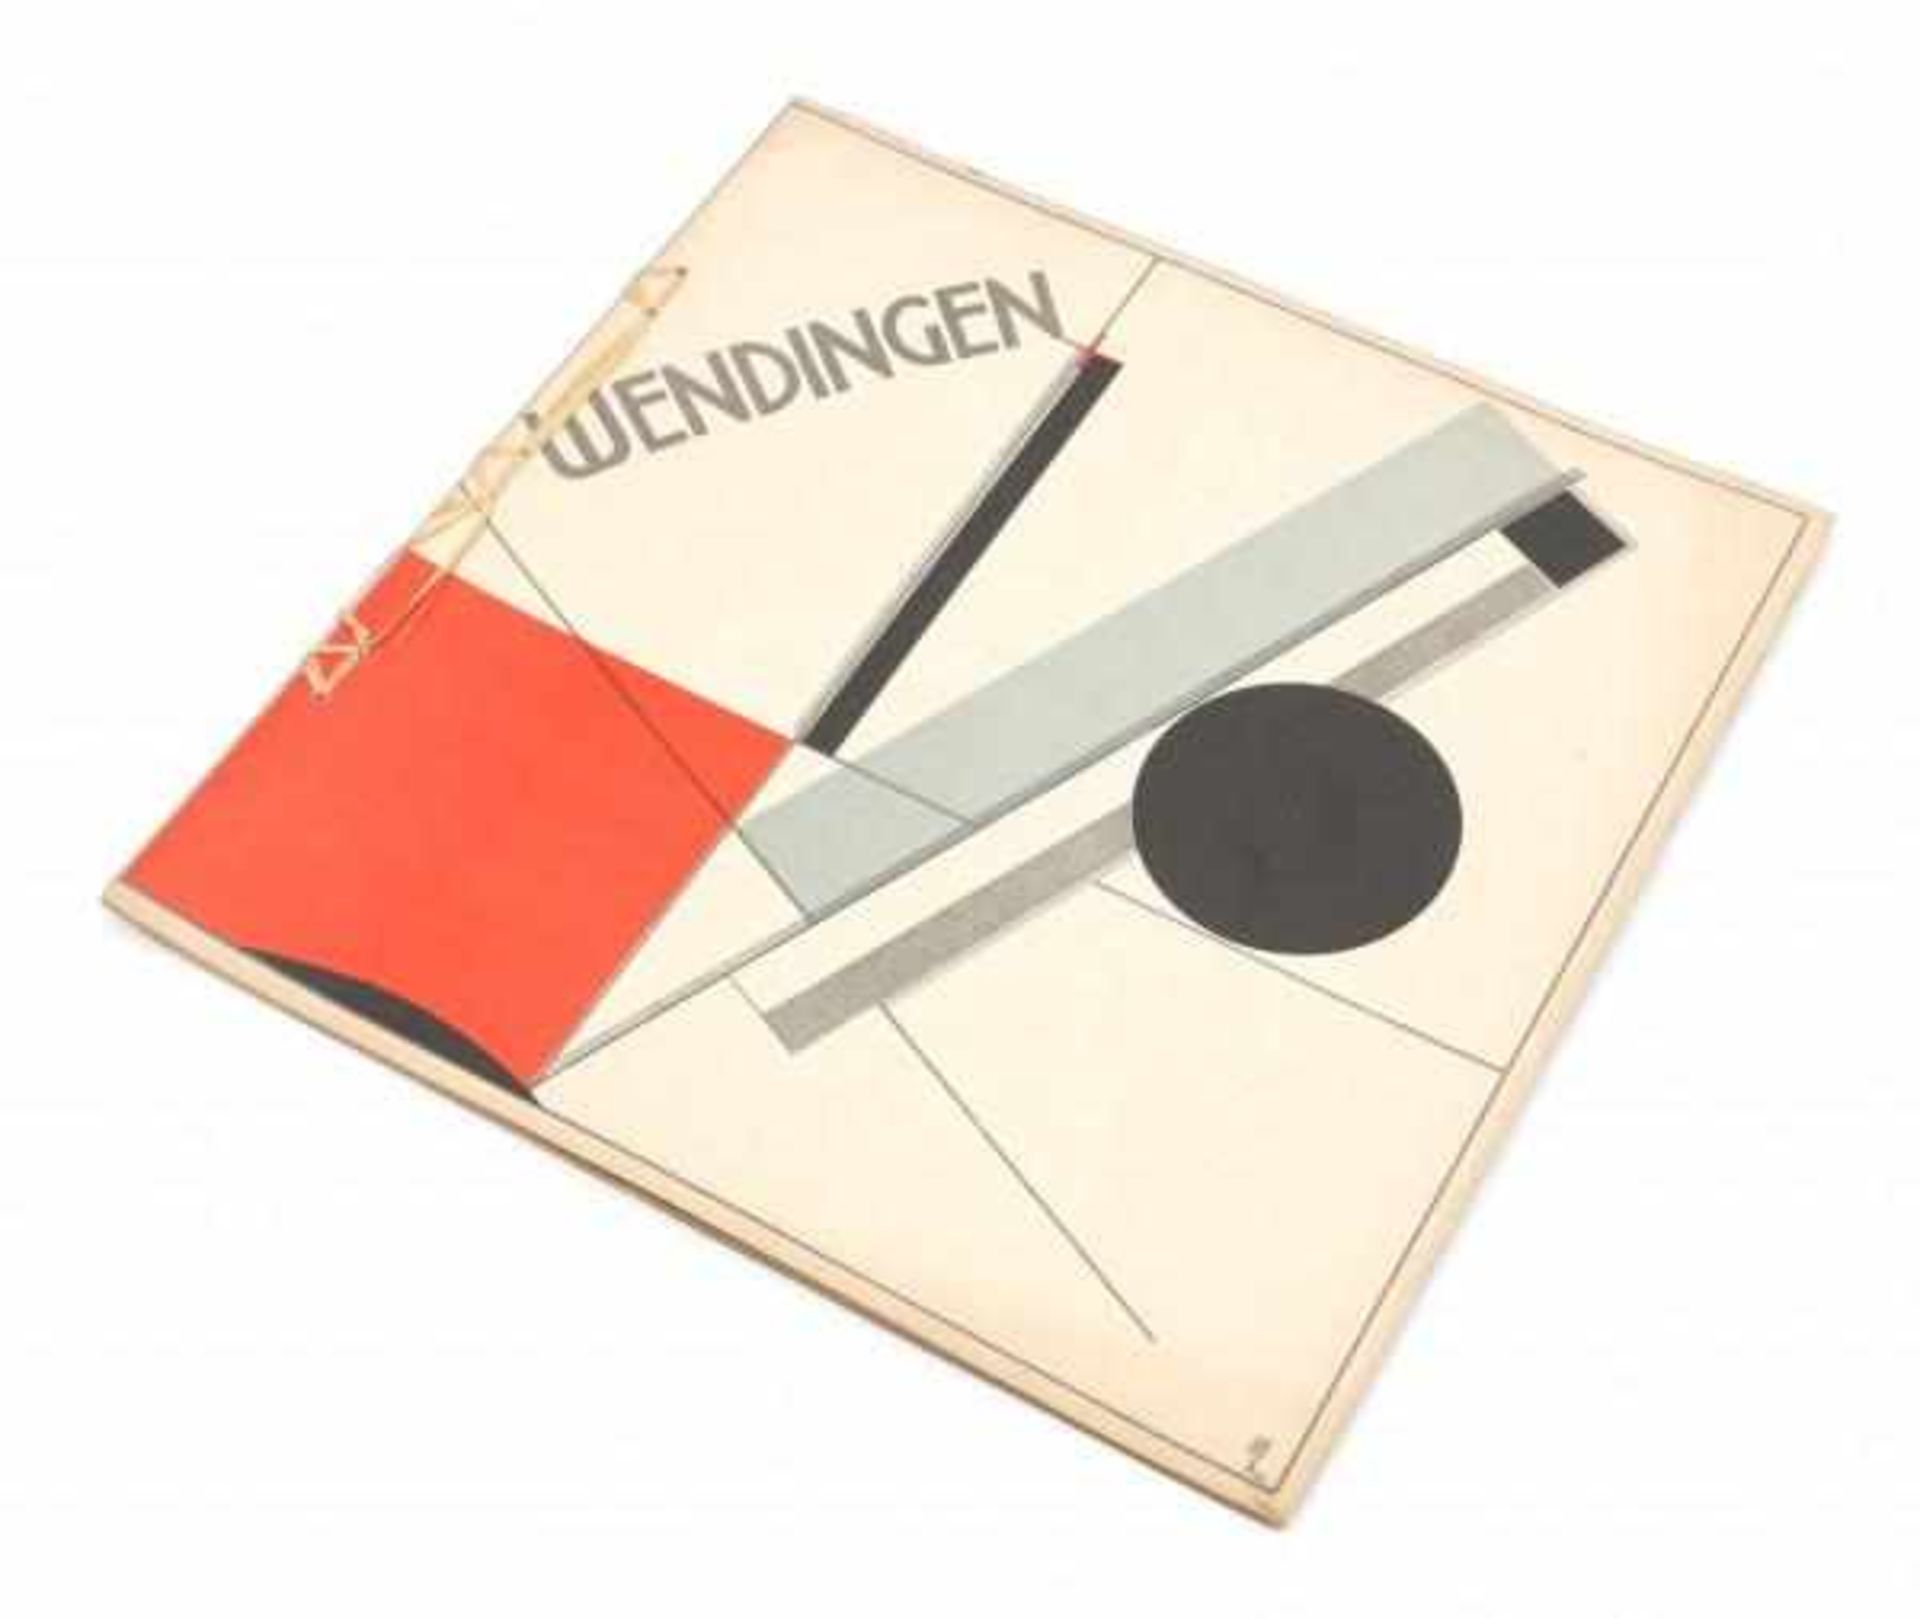 WendingenEdition dedicated to Frank Lloyd Wright (Serie 4, no. 11, 1921), the cover designed by El